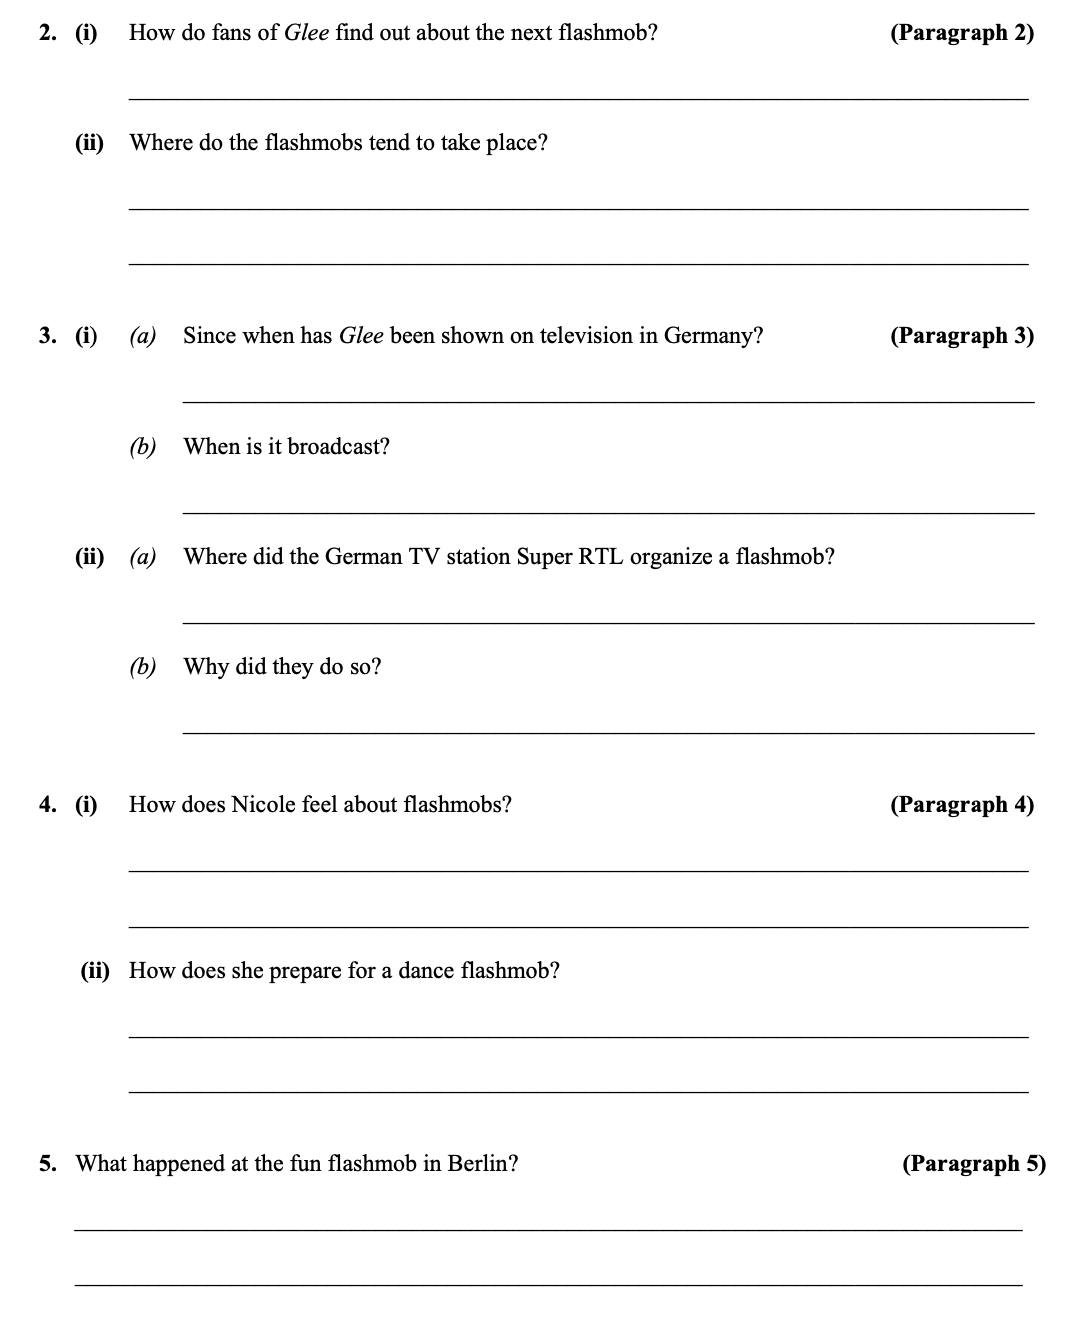 an image of the question 2012 Sec2 F which is about the topic read long text and the subject is Junior Certificate german